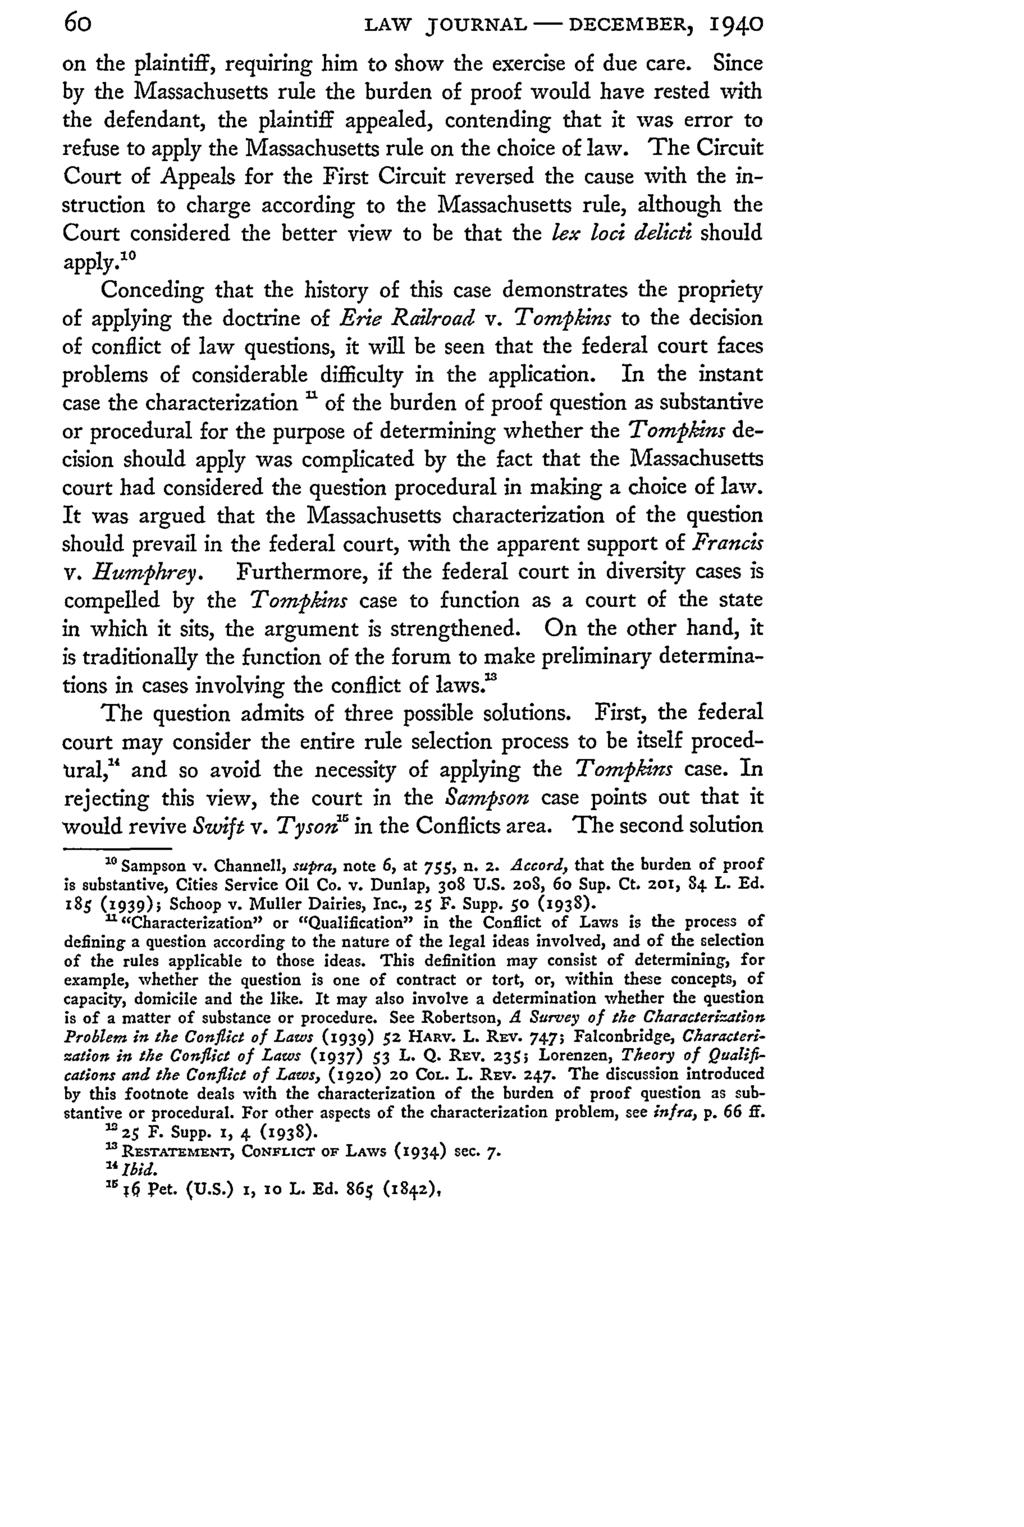 60 LAW JOURNAL - DECEMBER, 1940 on the plaintiff, requiring him to show the exercise of due care.